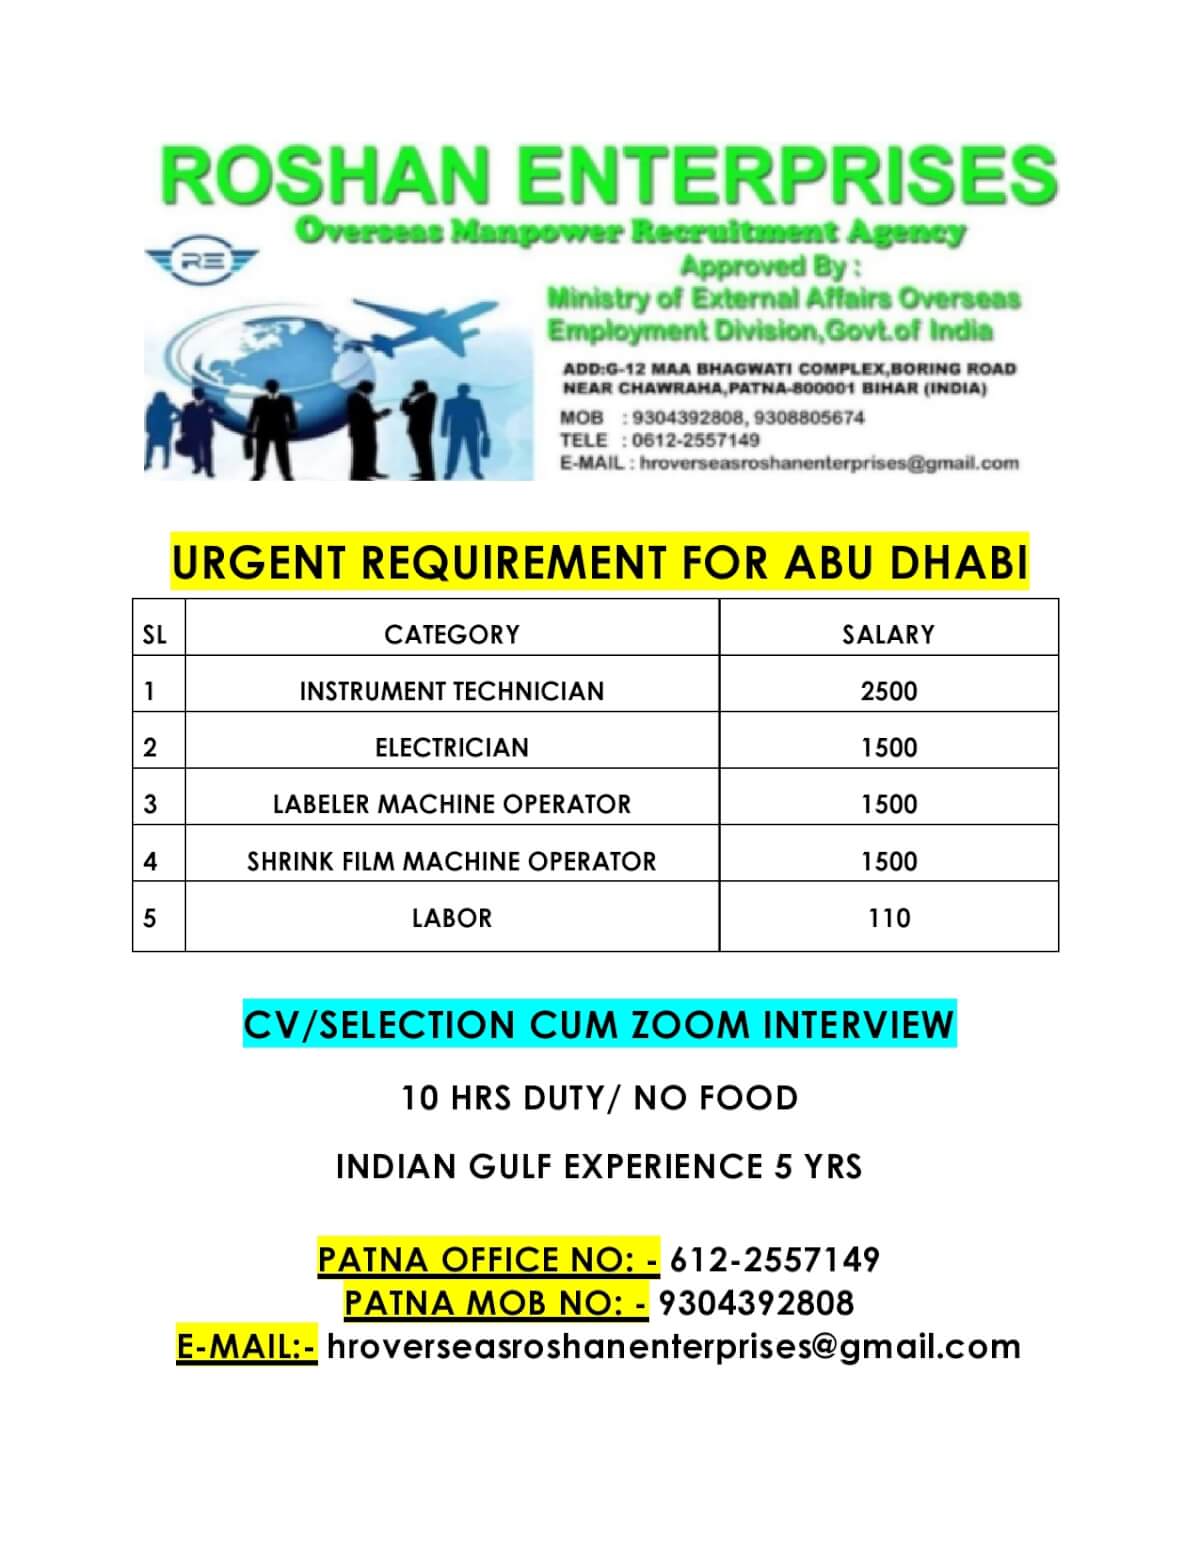 URGENT REQUIREMENT FOR ABU DHABI